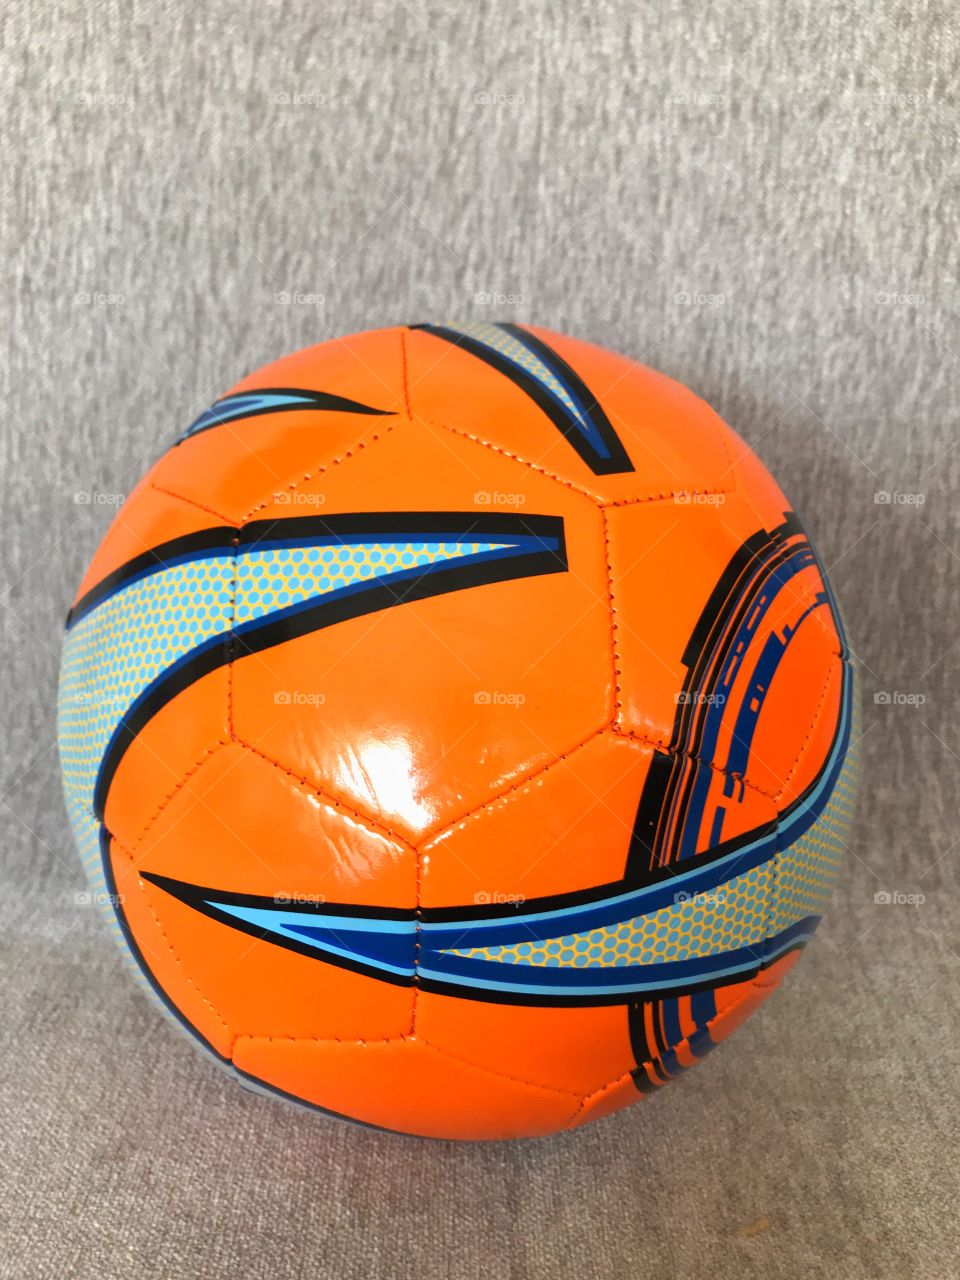 soccer ball on gray background